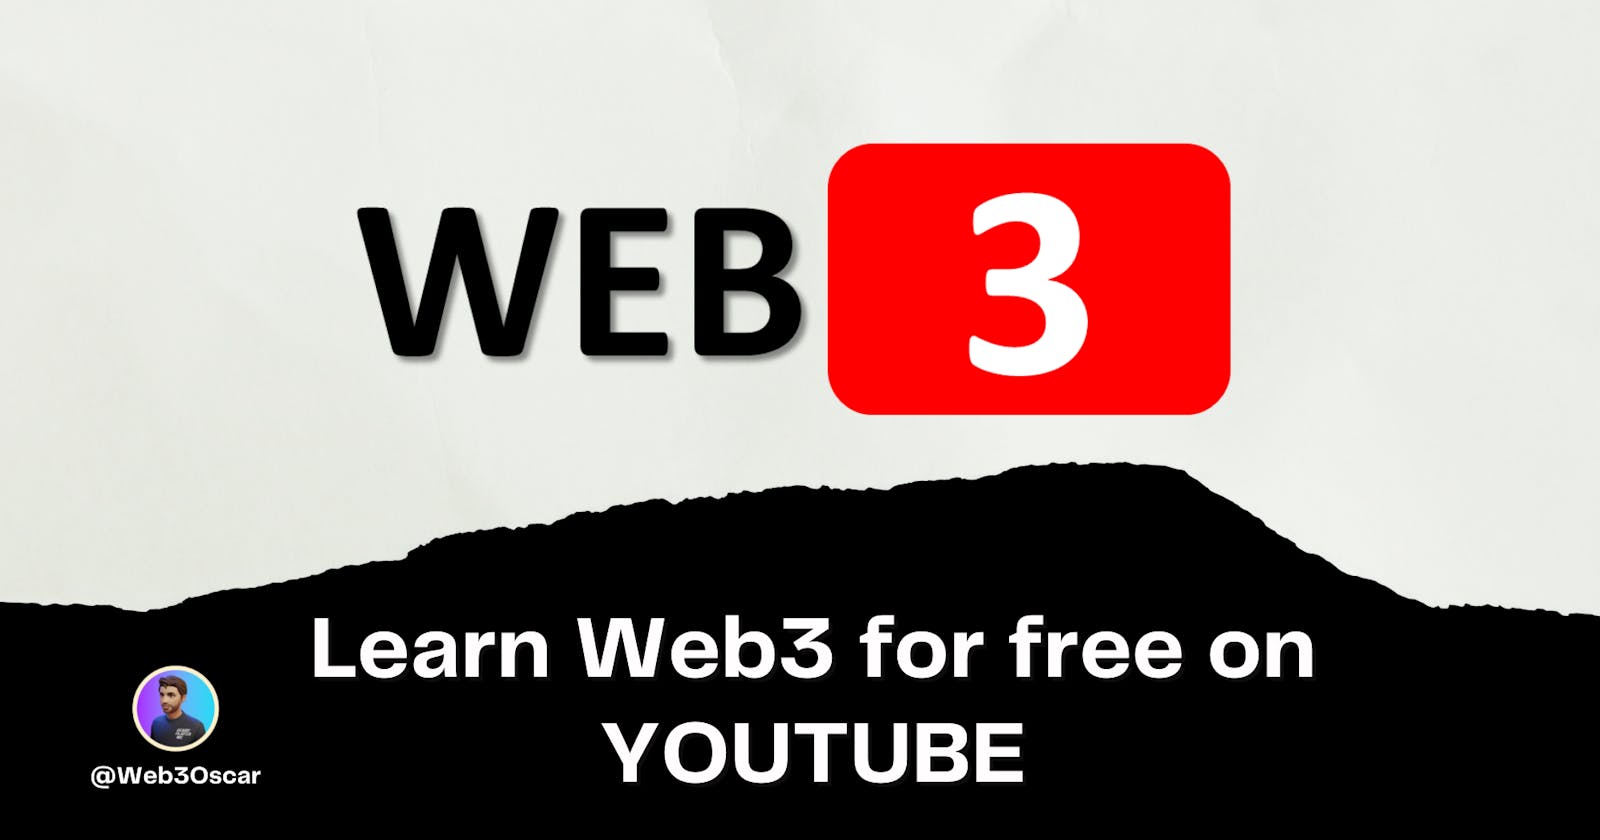 Top 10 Youtube channels to learn Web3 for FREE.